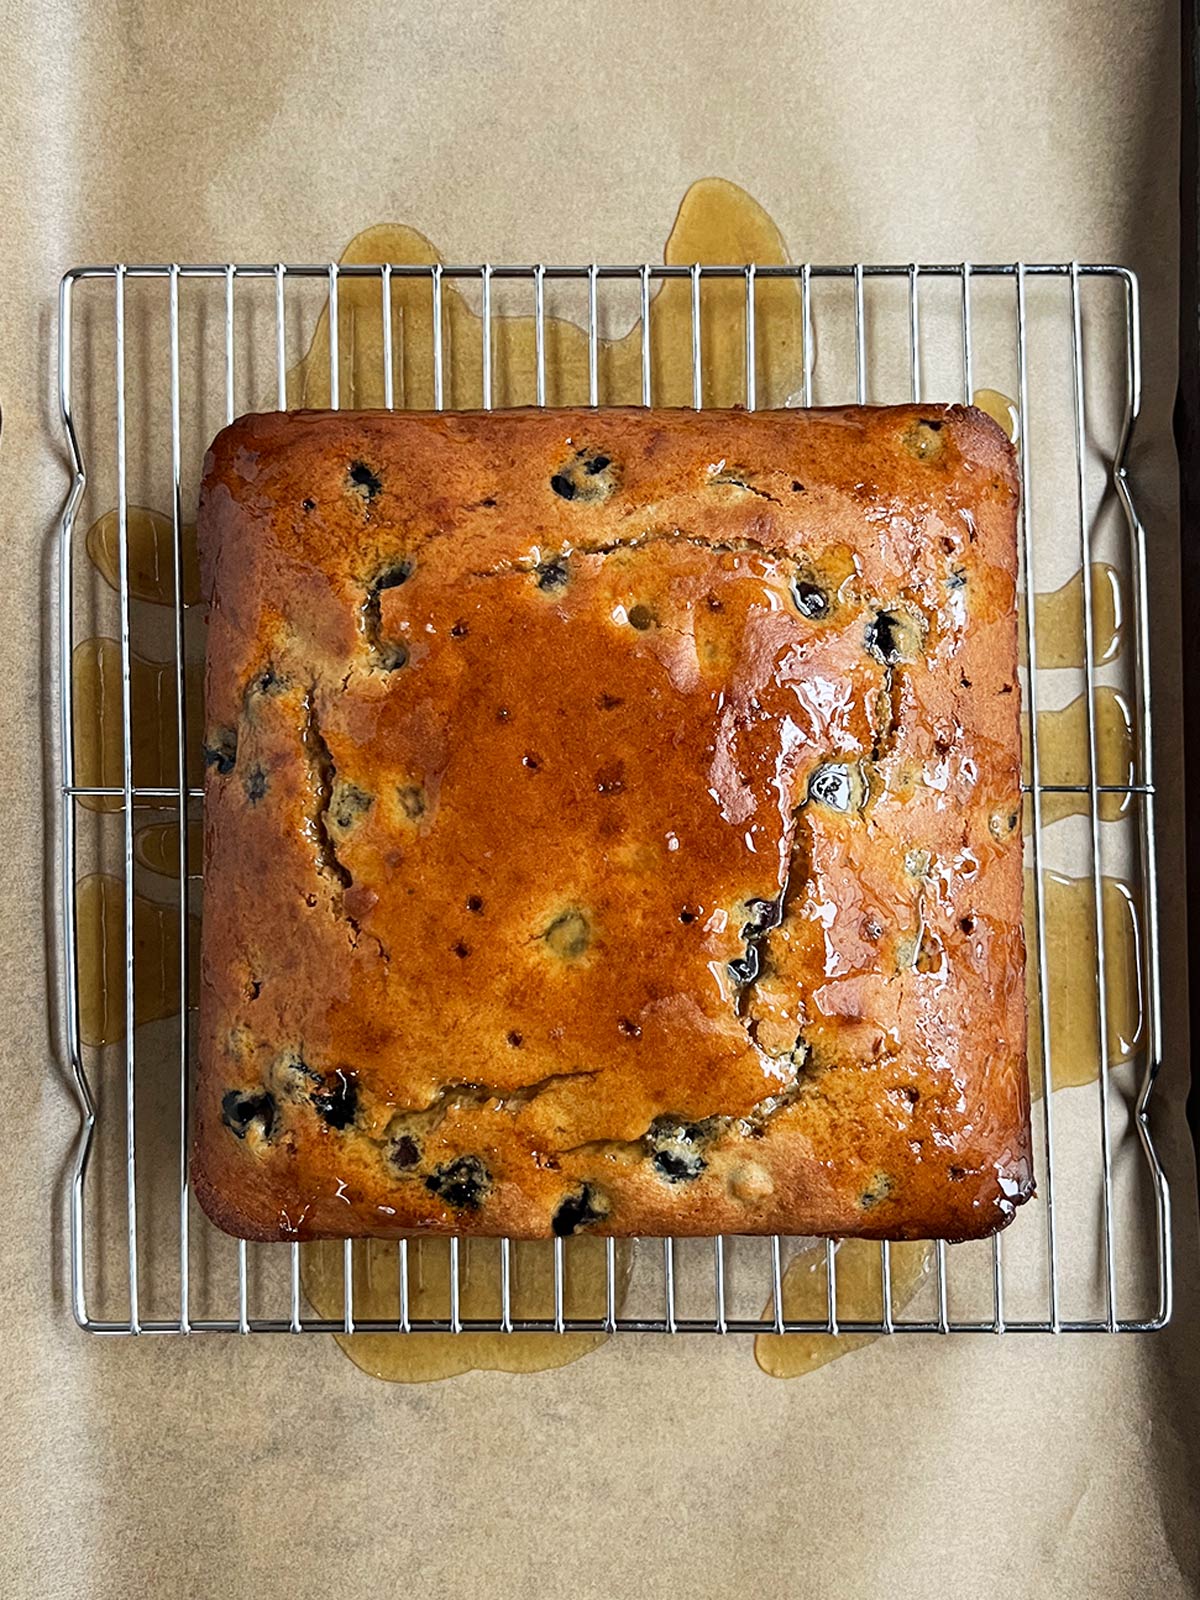 Olive oil blueberry cake on rack with glaze poured over and excess on the parchment paper below.